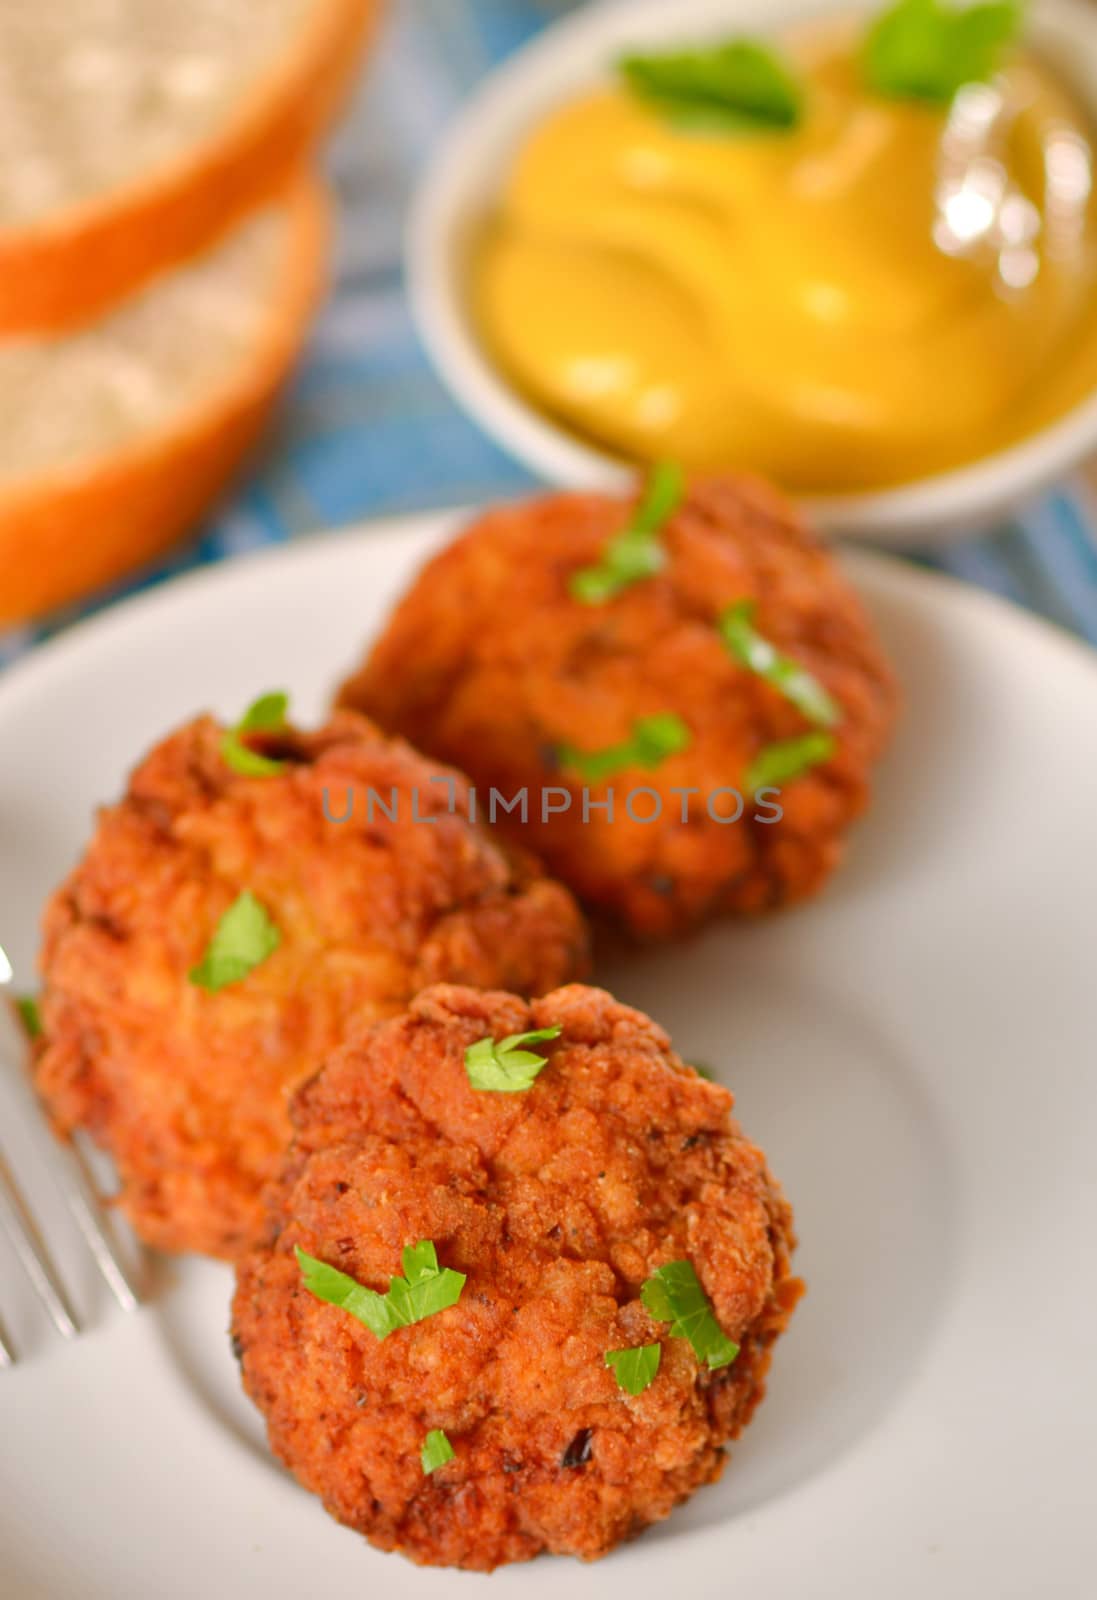 meat balls with mustard on white dish by mady70